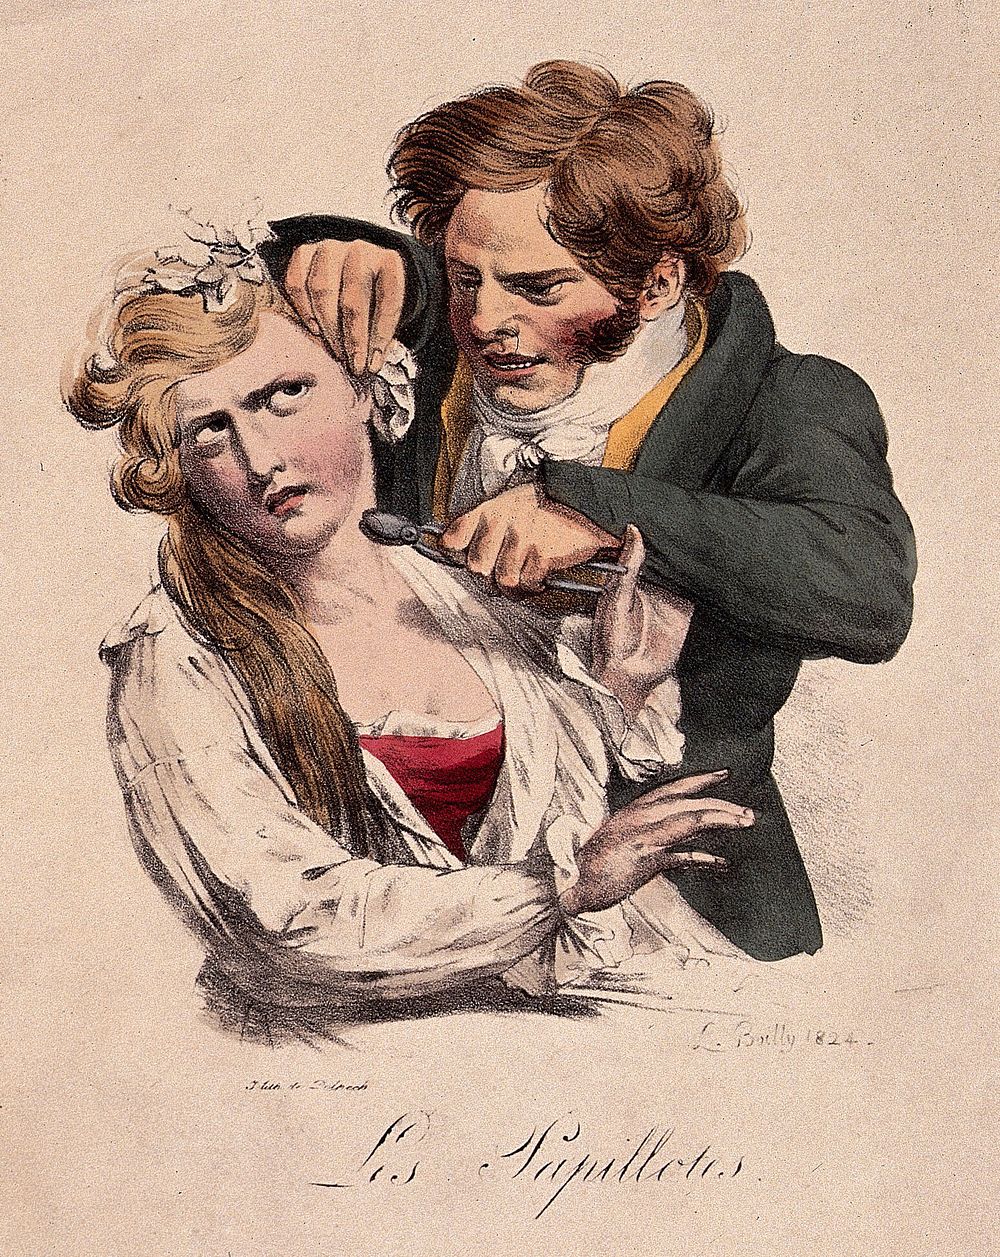 A man is piercing a girl's ear for an earring. Coloured lithograph after L. Boilly.